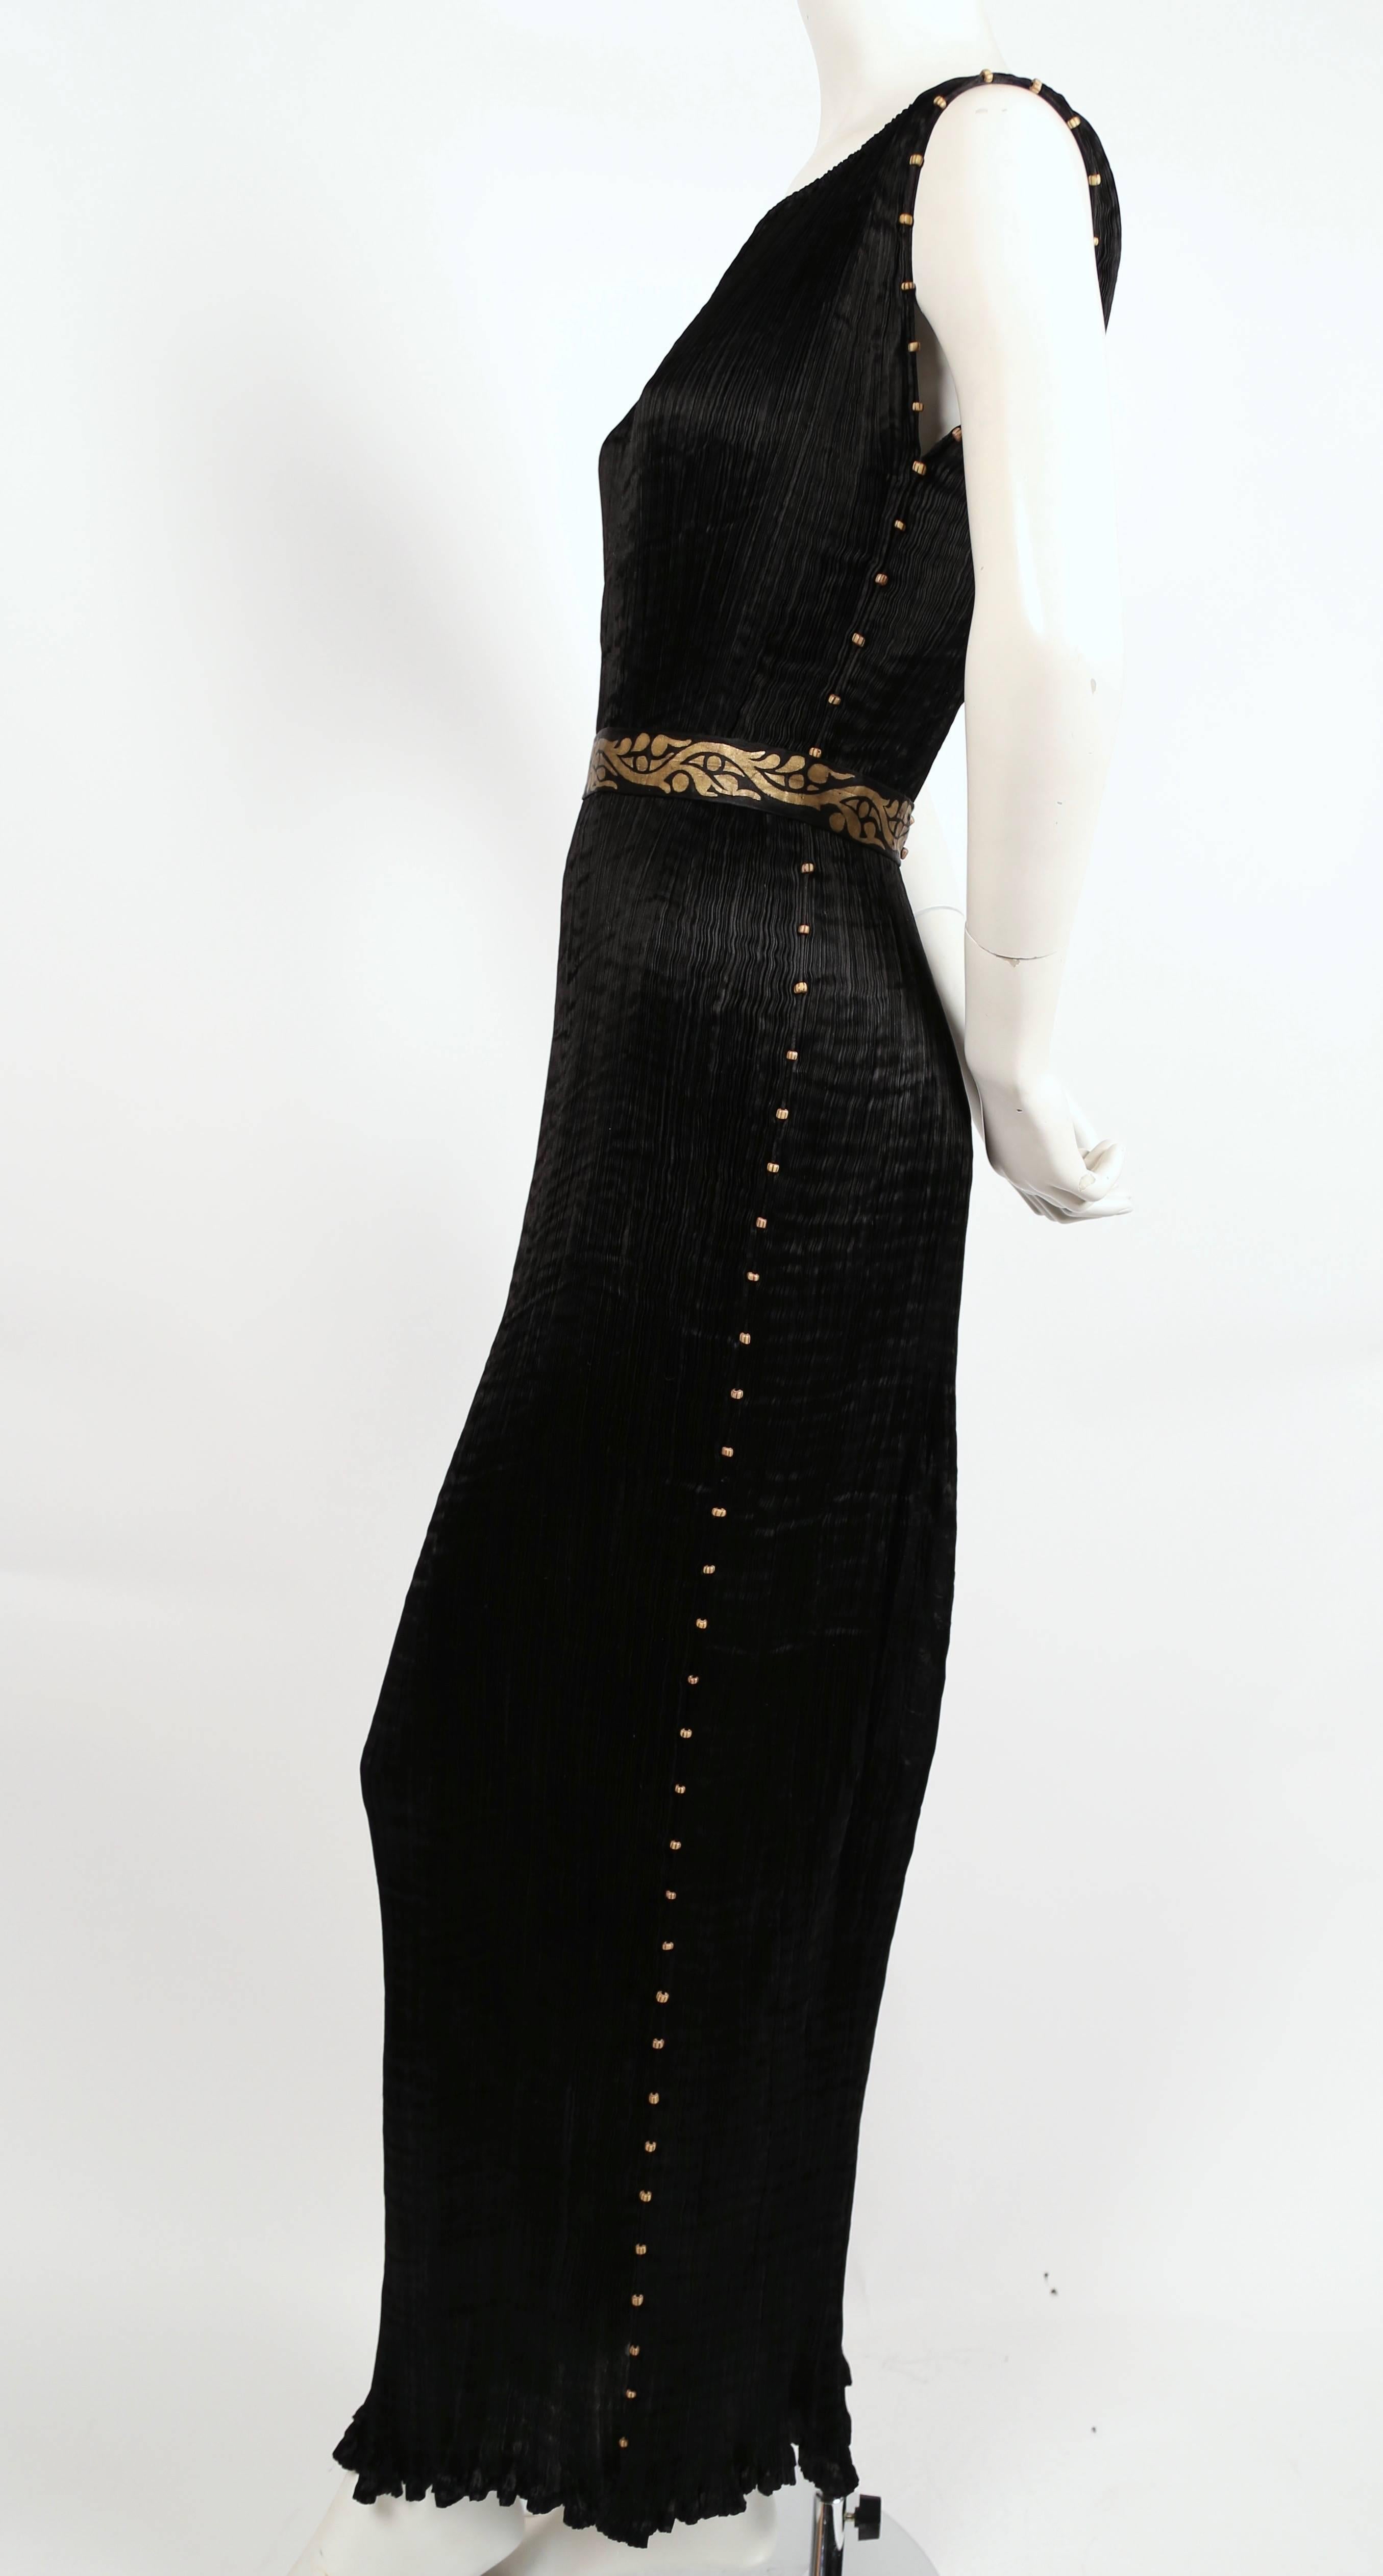 jet black pleated silk 'Delphos' gown with Venetian striped glass beads and stamped gold silk belt from Mariano Fortuny dating to the 1920's. Adjustable drawstring at neckline. Fits a variety of sizes due to the pleated construction. Length is about